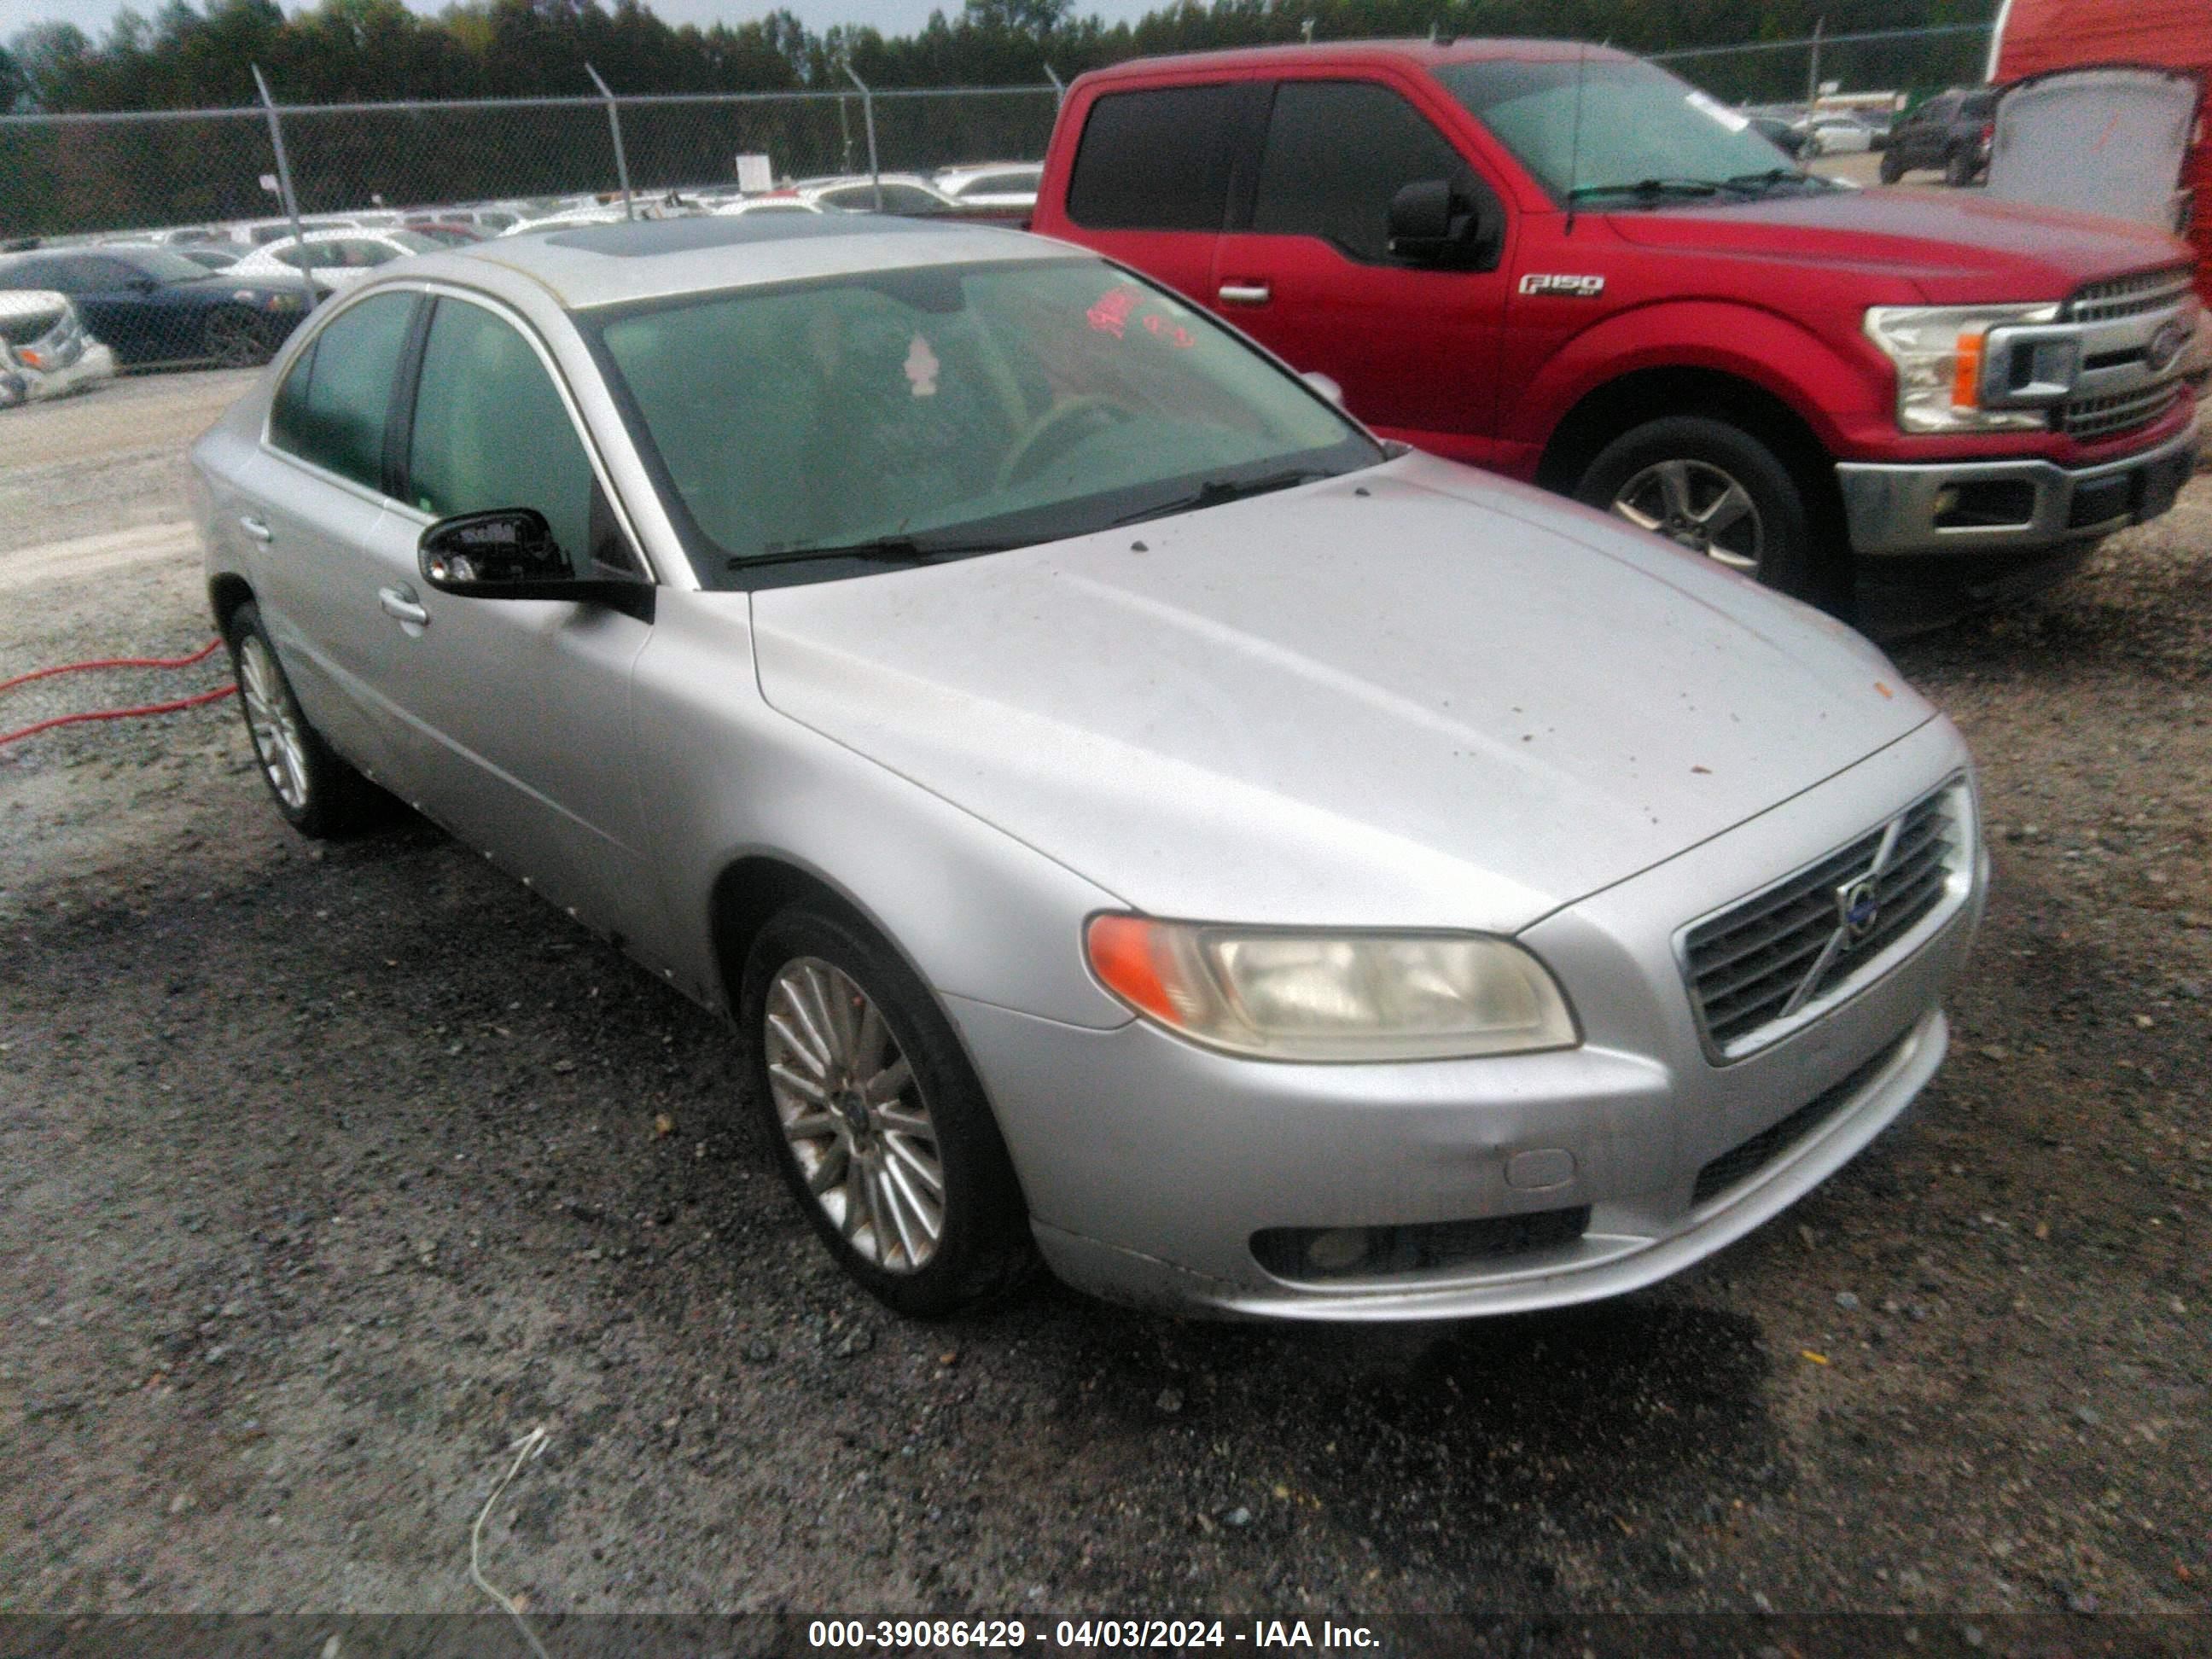 volvo s80 2008 yv1as982x81057234